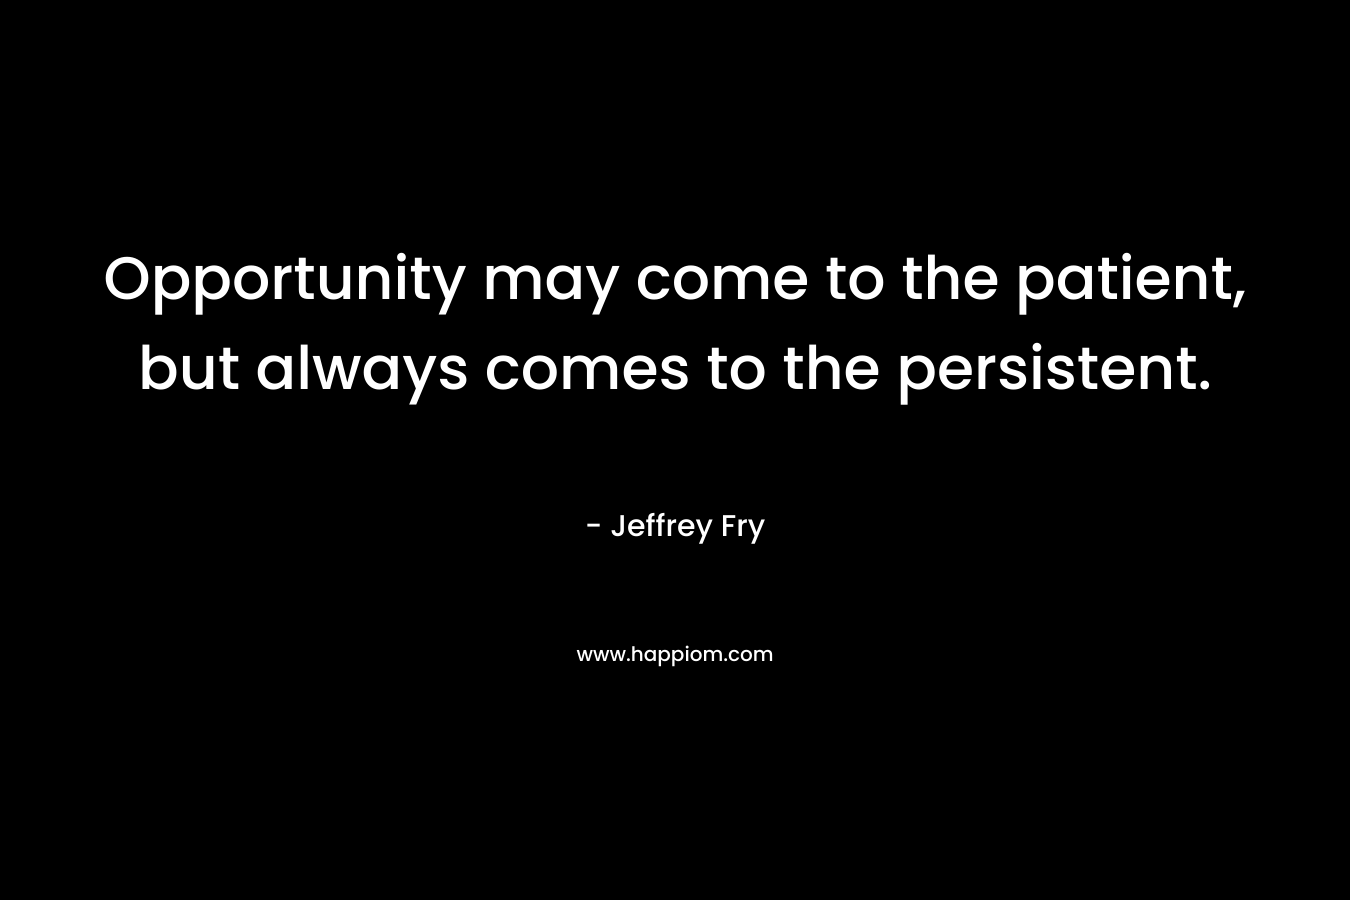 Opportunity may come to the patient, but always comes to the persistent. – Jeffrey Fry